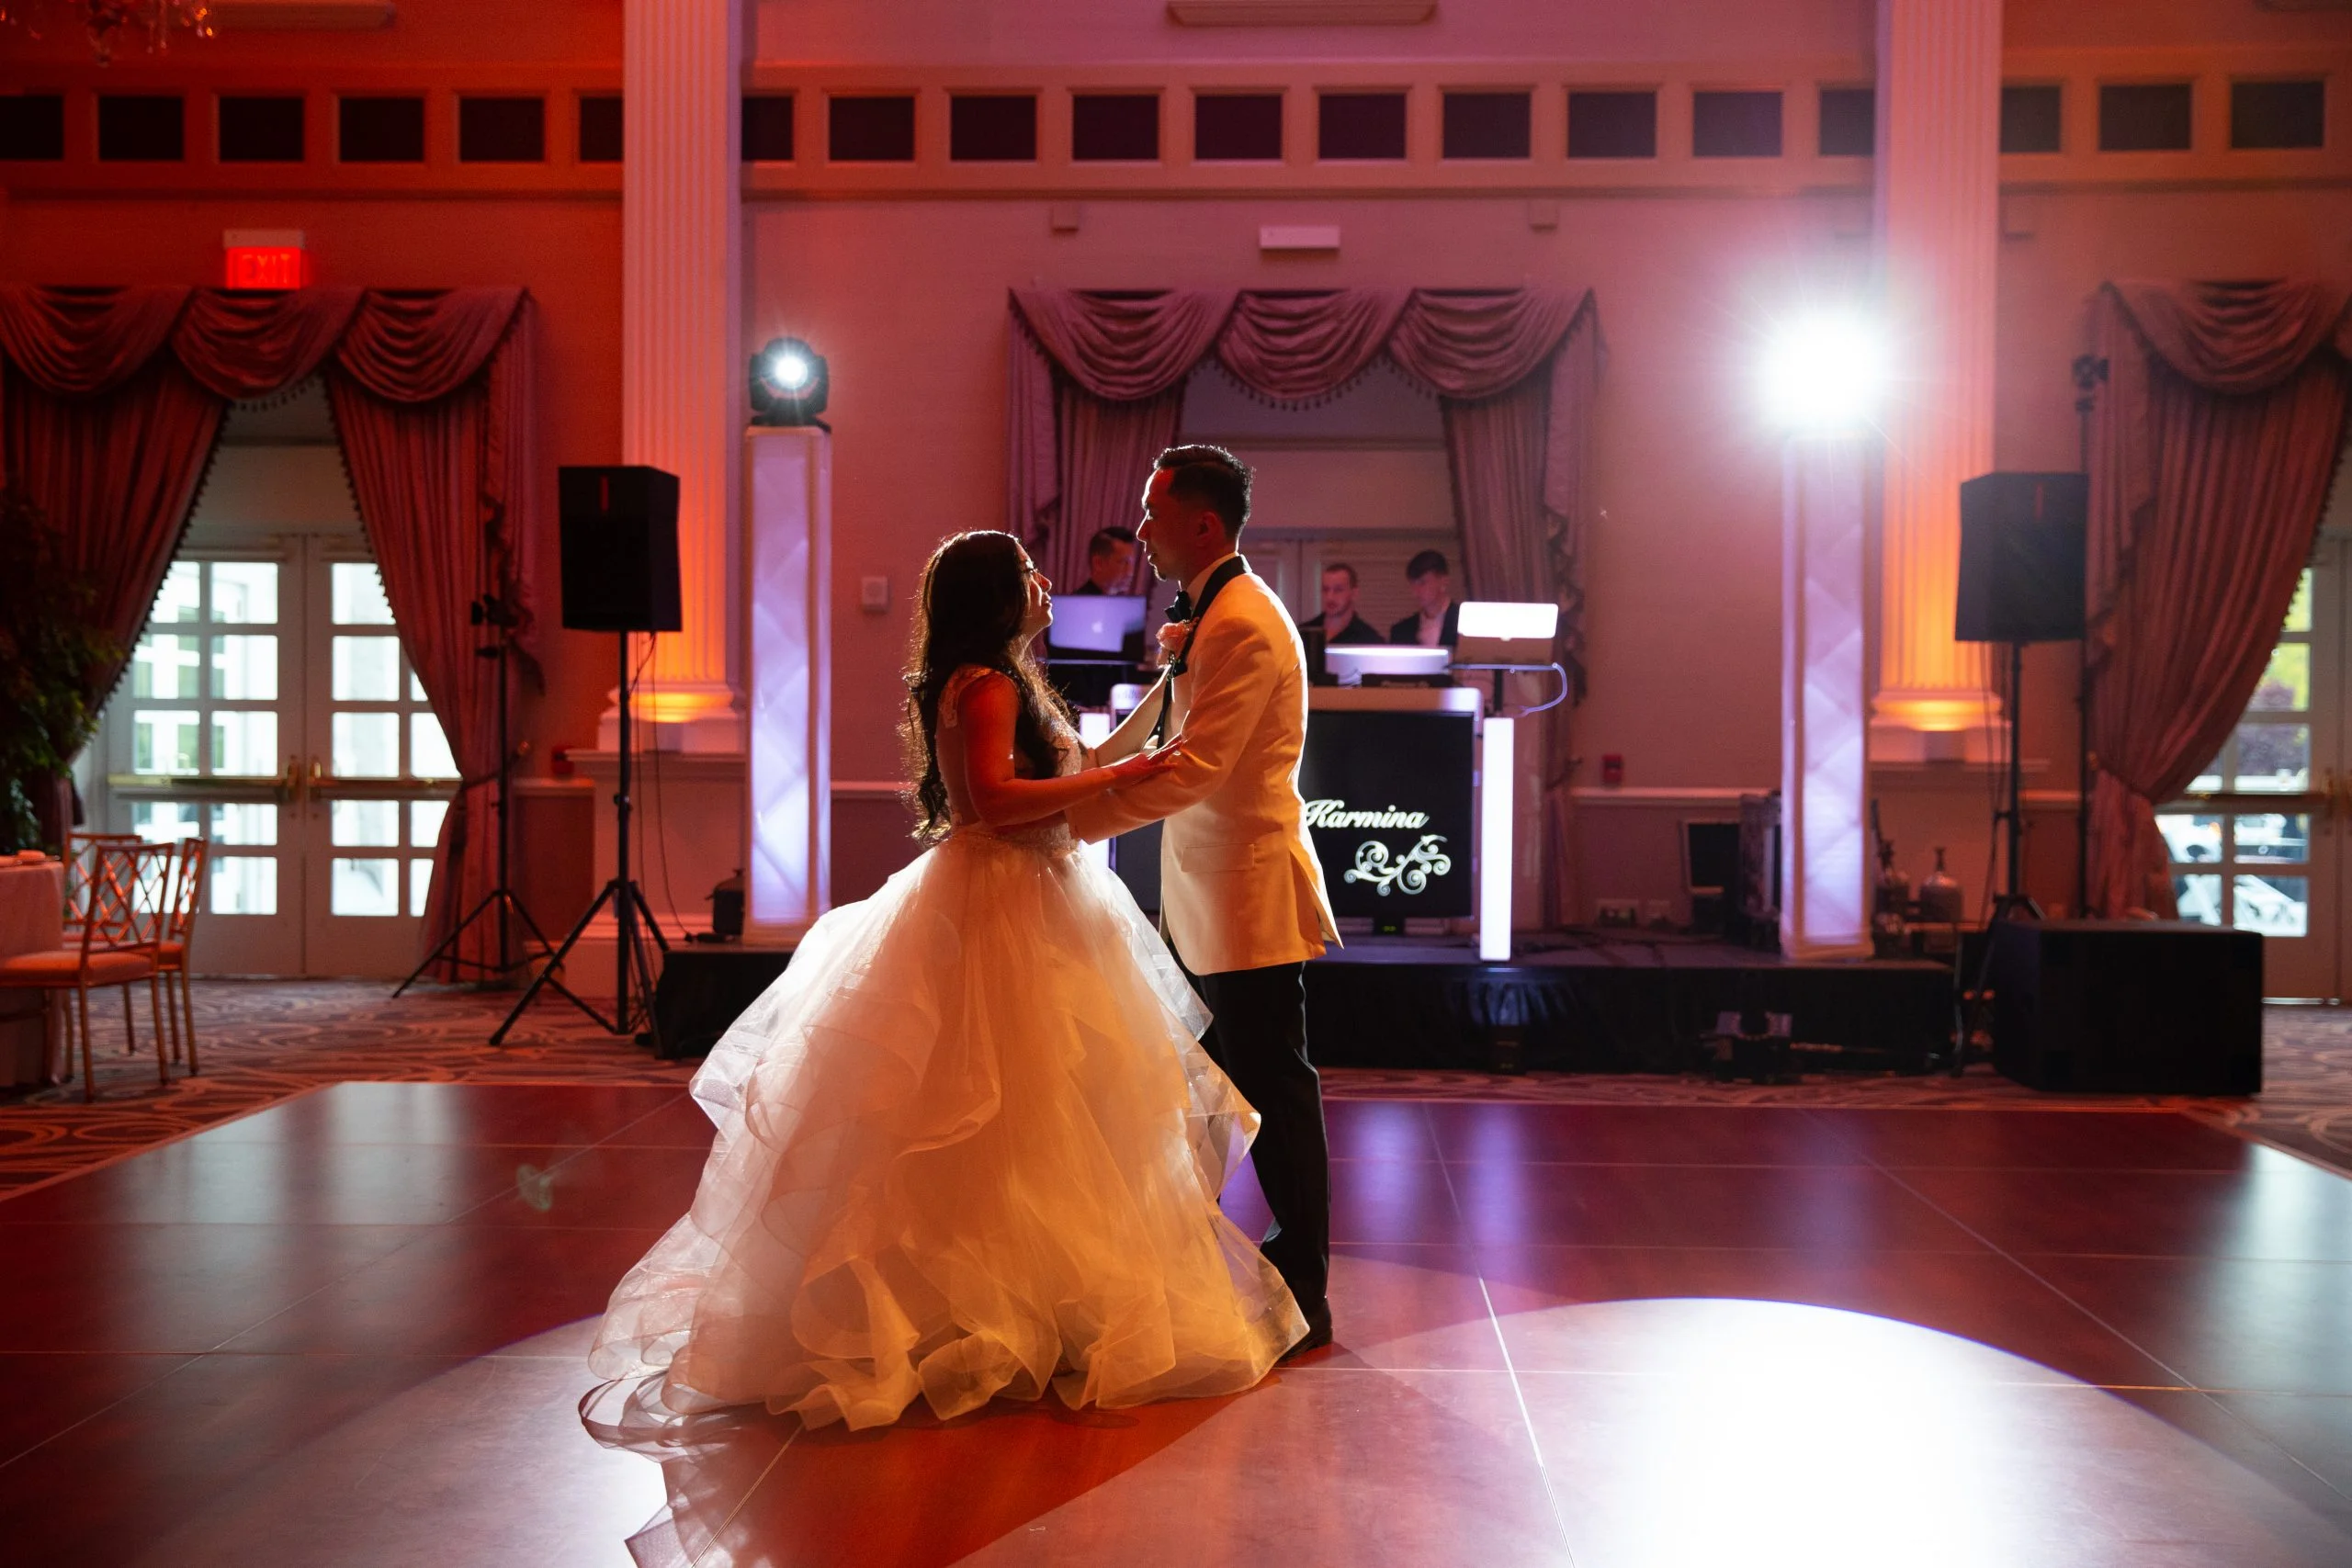 A bride and groom sharing their first dance in a ballroom.